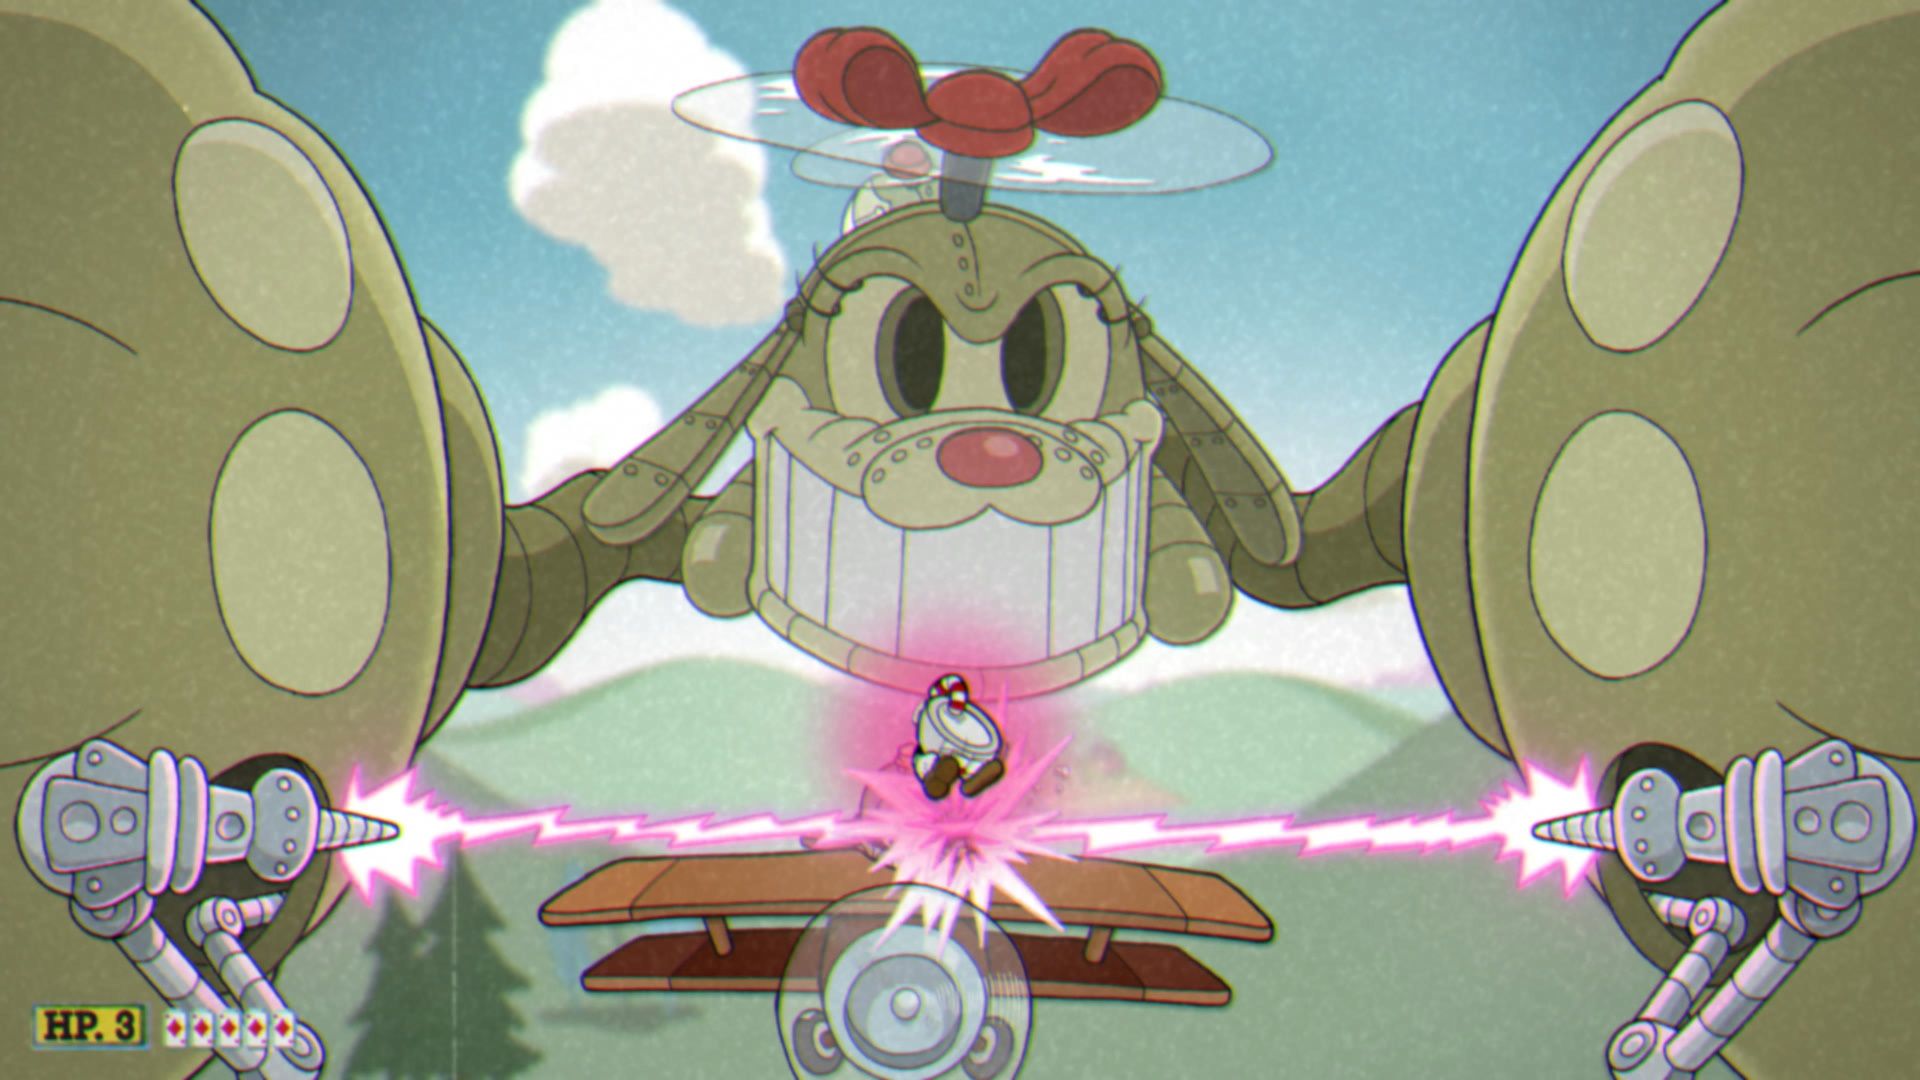 Cuphead The Delicious Course, The Howling Aces, Phase 3, Parrying the laser